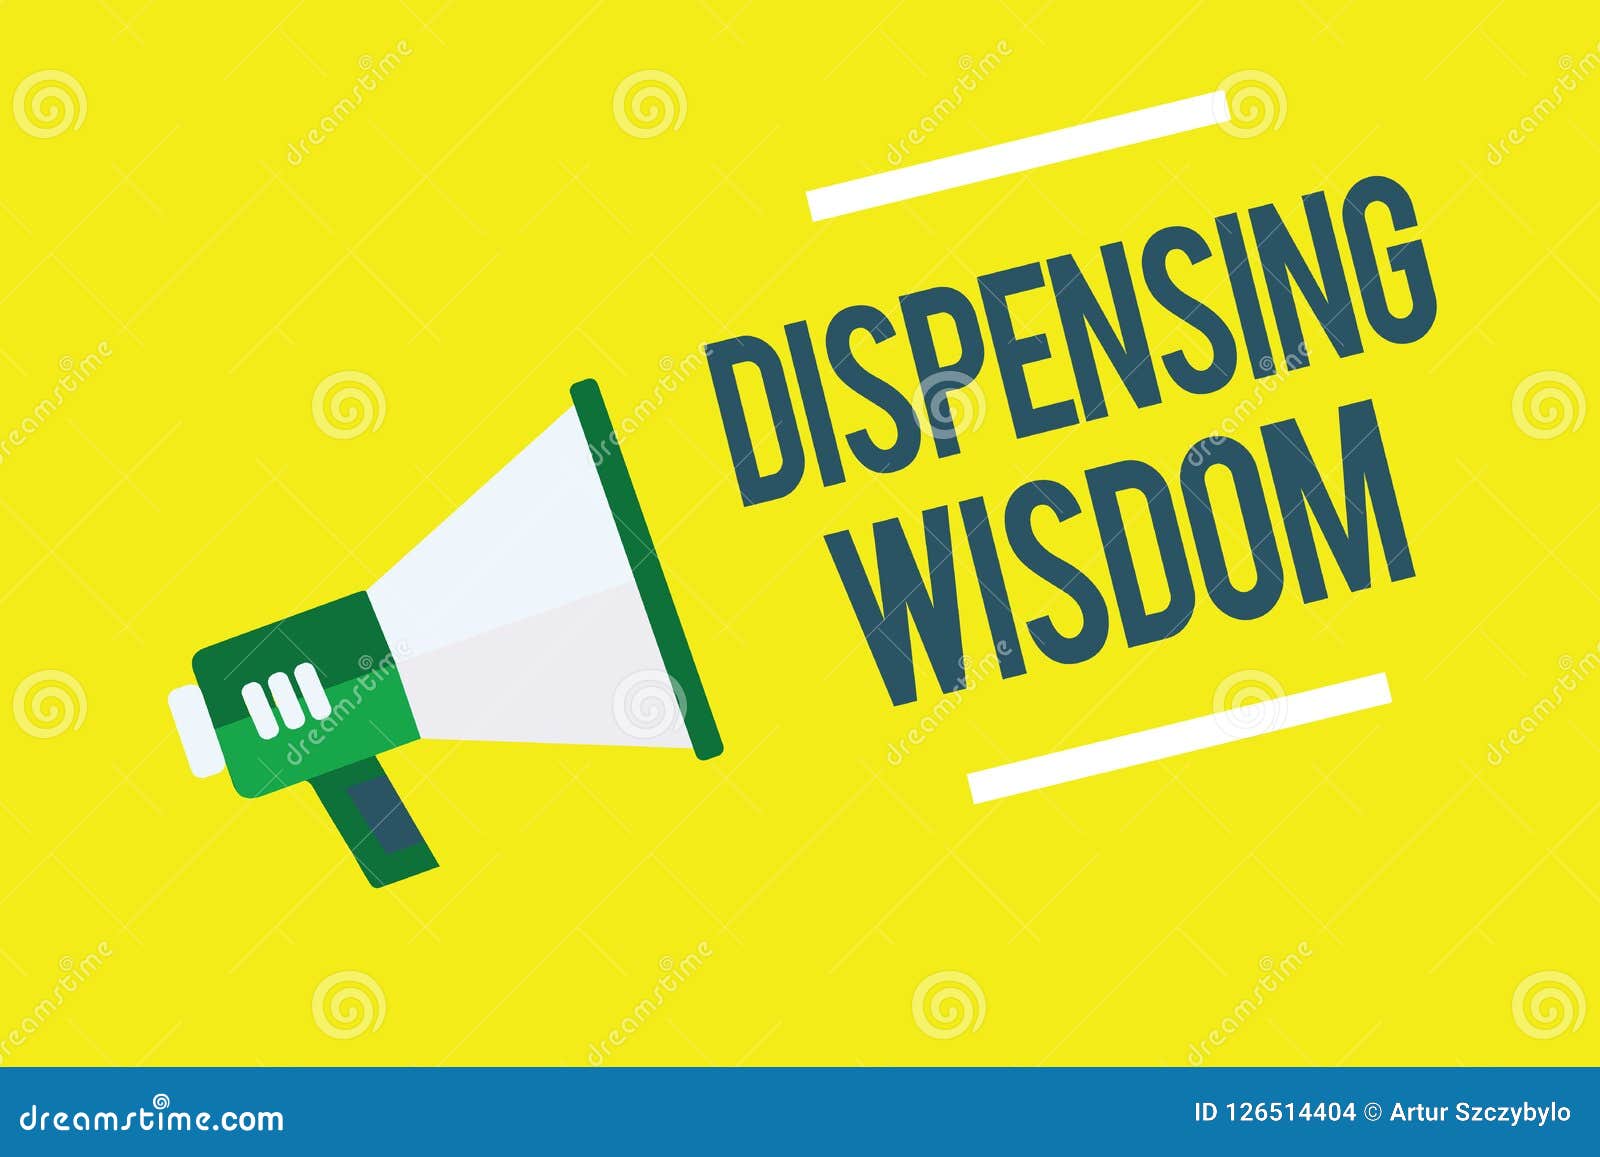 Writing Note Showing Dispensing Wisdom. Business Photo Giving Intellectual Facts on Variety of Subjects Megaphone Yello Illustration - Illustration of adviser, mentor: 126514404